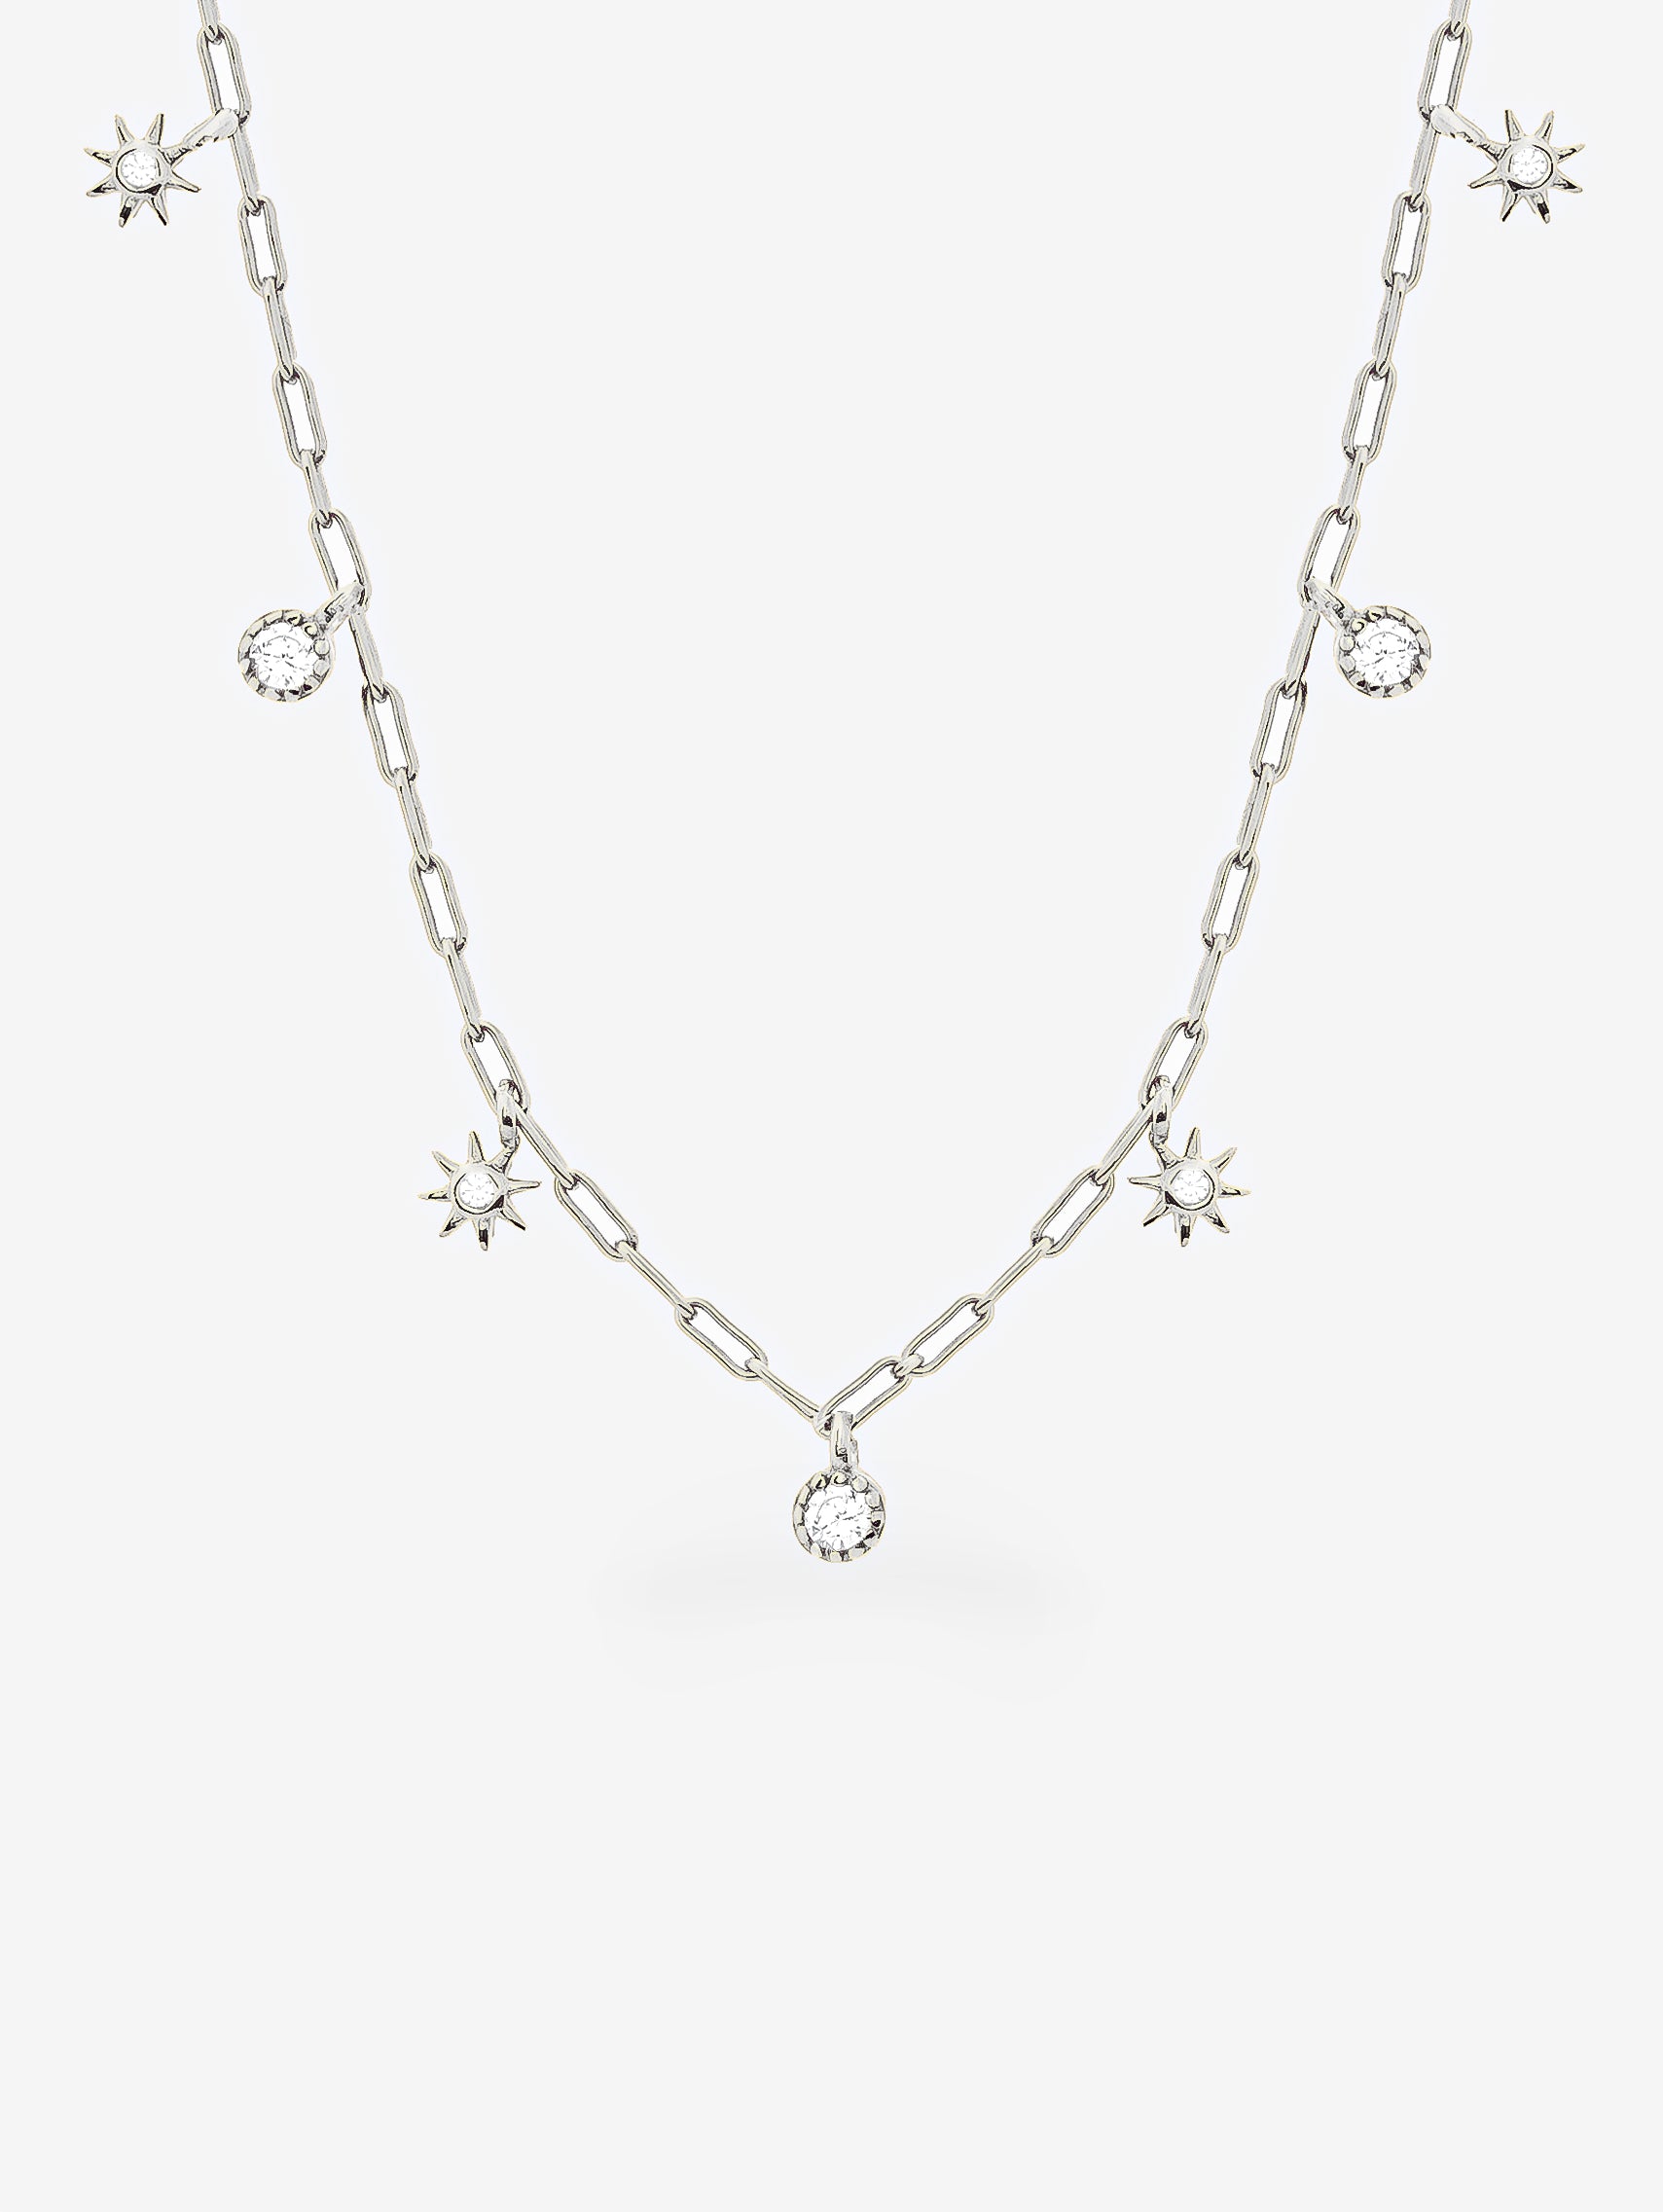 Silver Choker With Moon and Star Charms